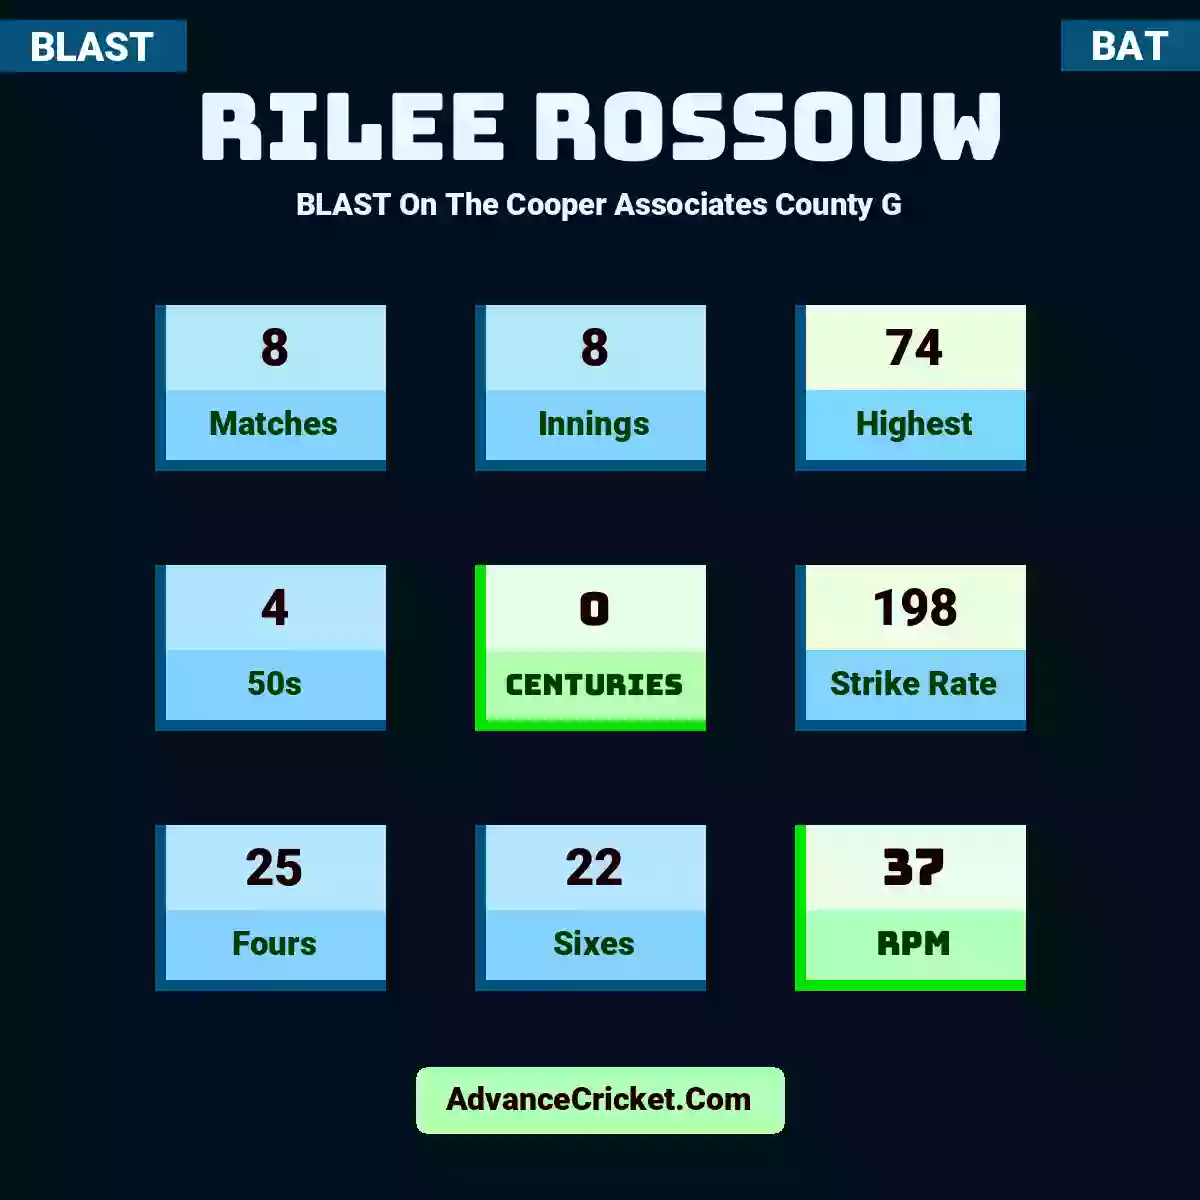 Rilee Rossouw BLAST  On The Cooper Associates County G, Rilee Rossouw played 8 matches, scored 74 runs as highest, 4 half-centuries, and 0 centuries, with a strike rate of 198. R.Rossouw hit 25 fours and 22 sixes, with an RPM of 37.